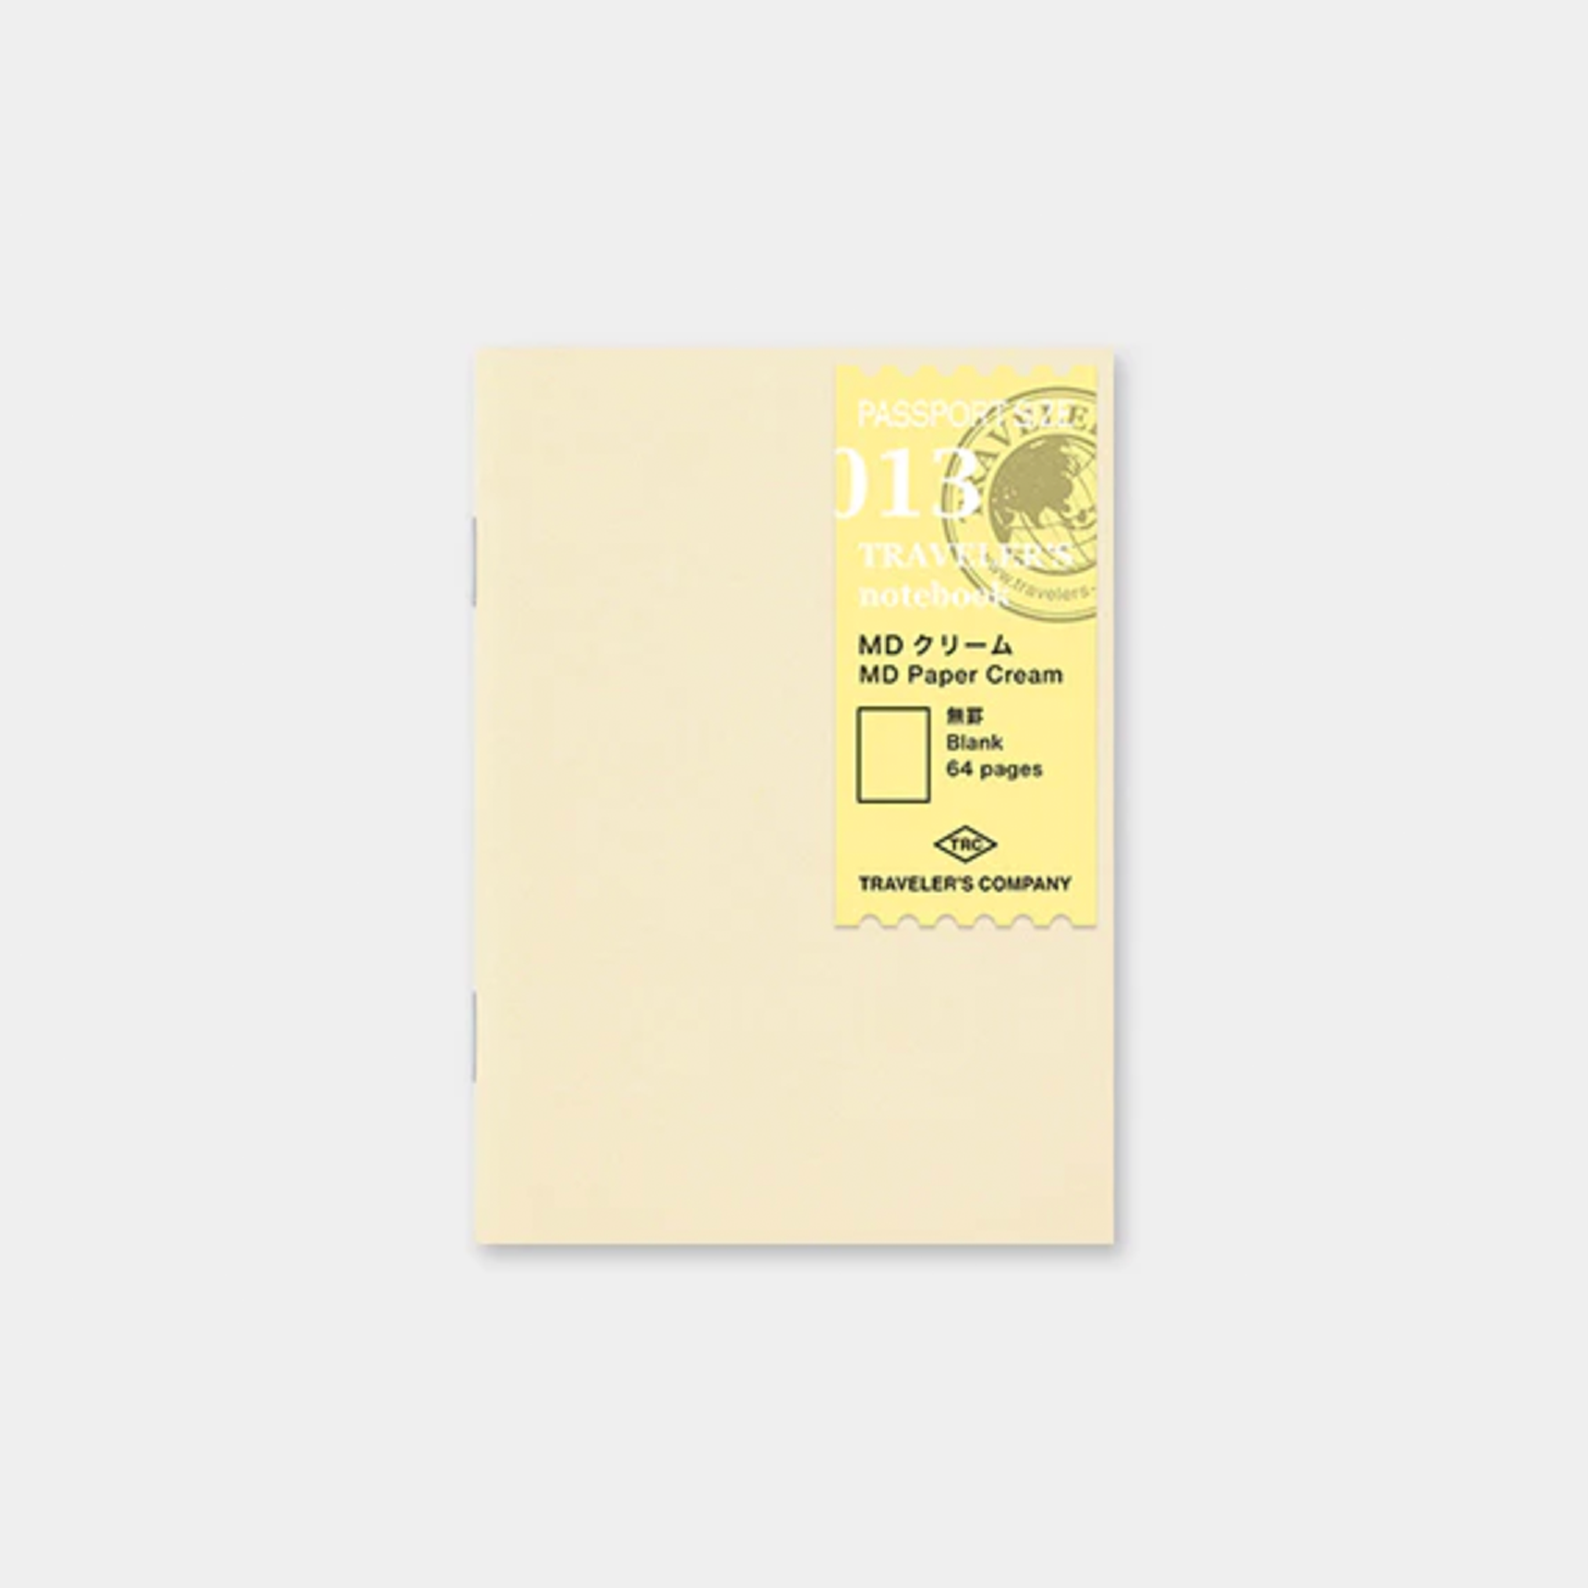 Traveler's Notebook Refill | MD Cream Paper | Traveler's Company | 2 SIZE OPTIONS AVAILABLE